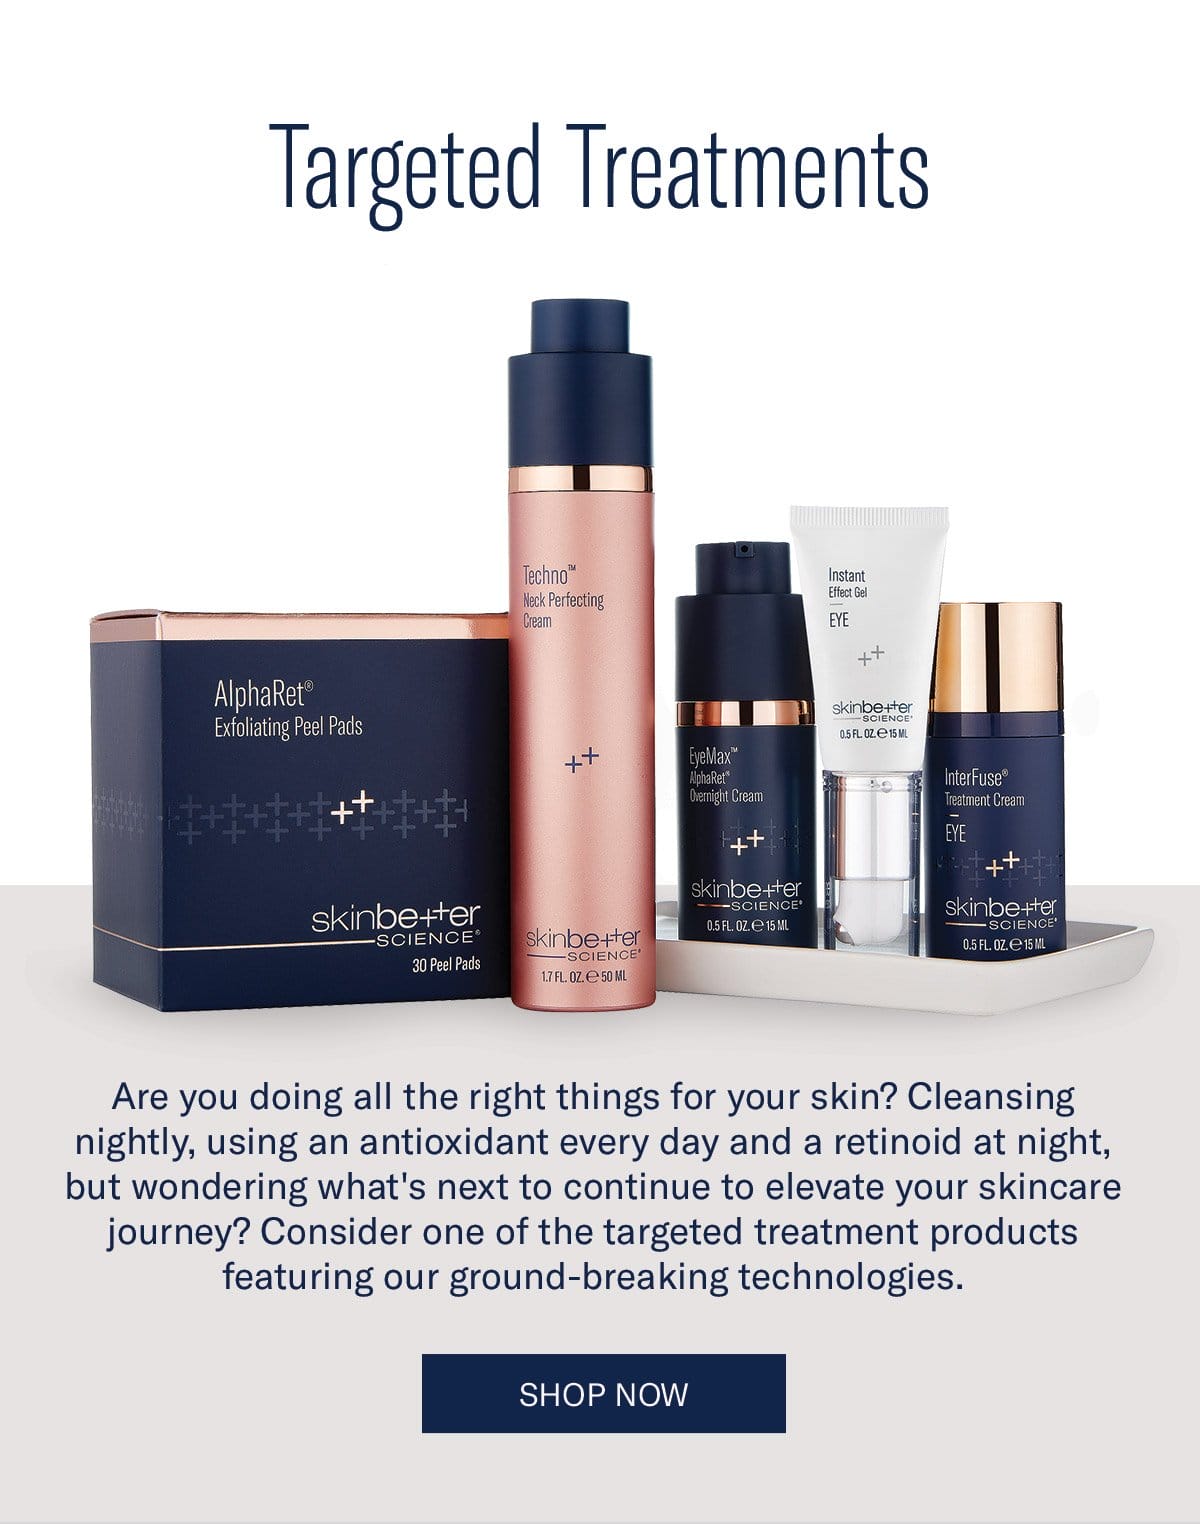 Targeted Treatment Products